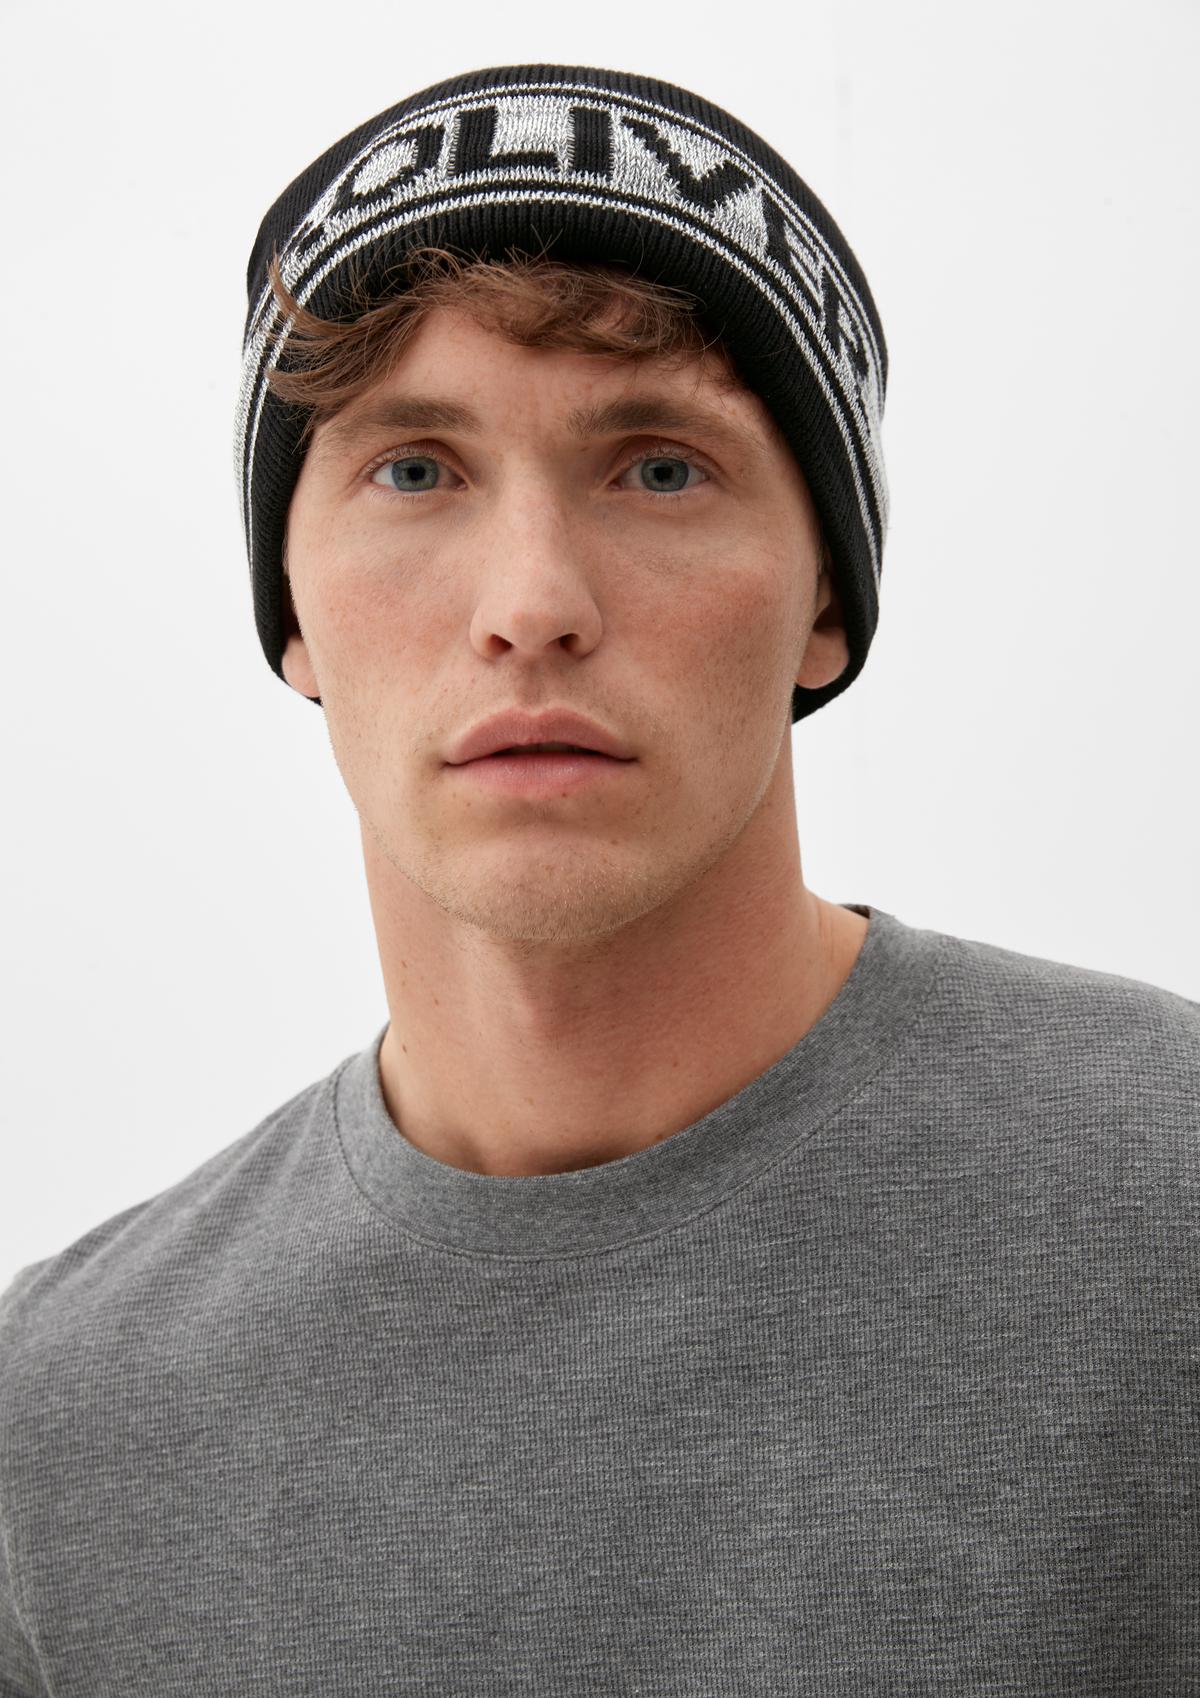 s.Oliver Knitted hat in a logo jacquard design